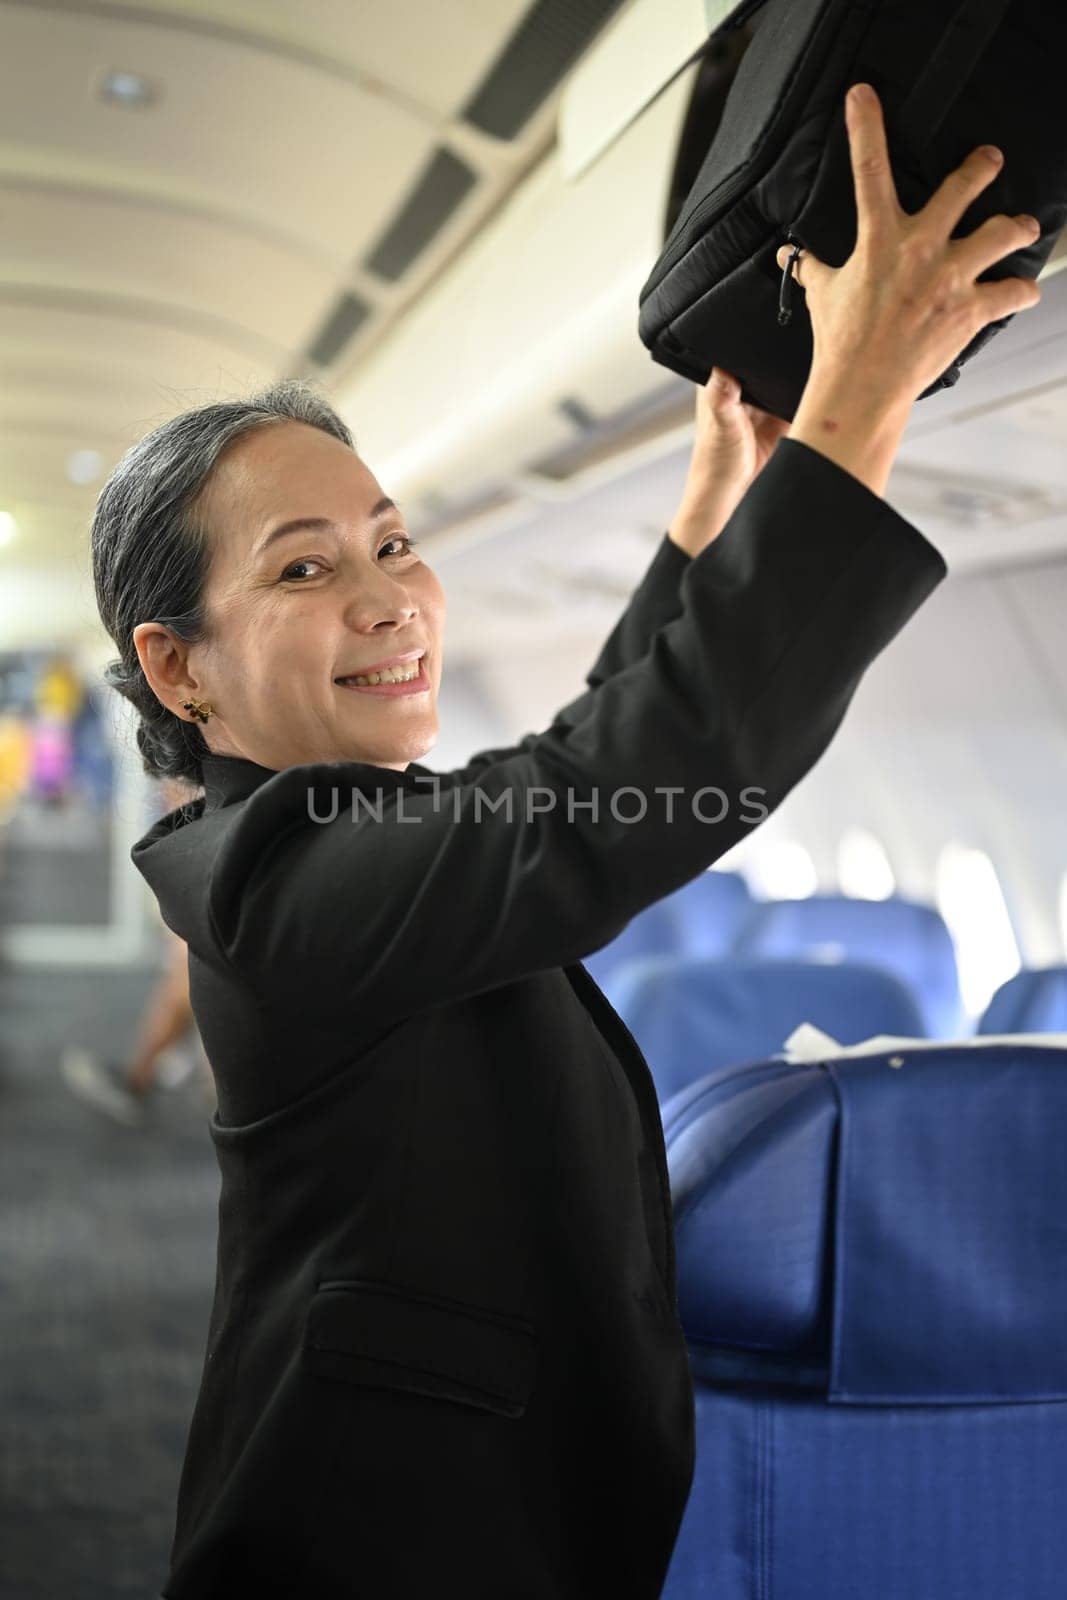 Smiling middle age woman passengers putting her luggage into the overhead compartment on an airplane by prathanchorruangsak